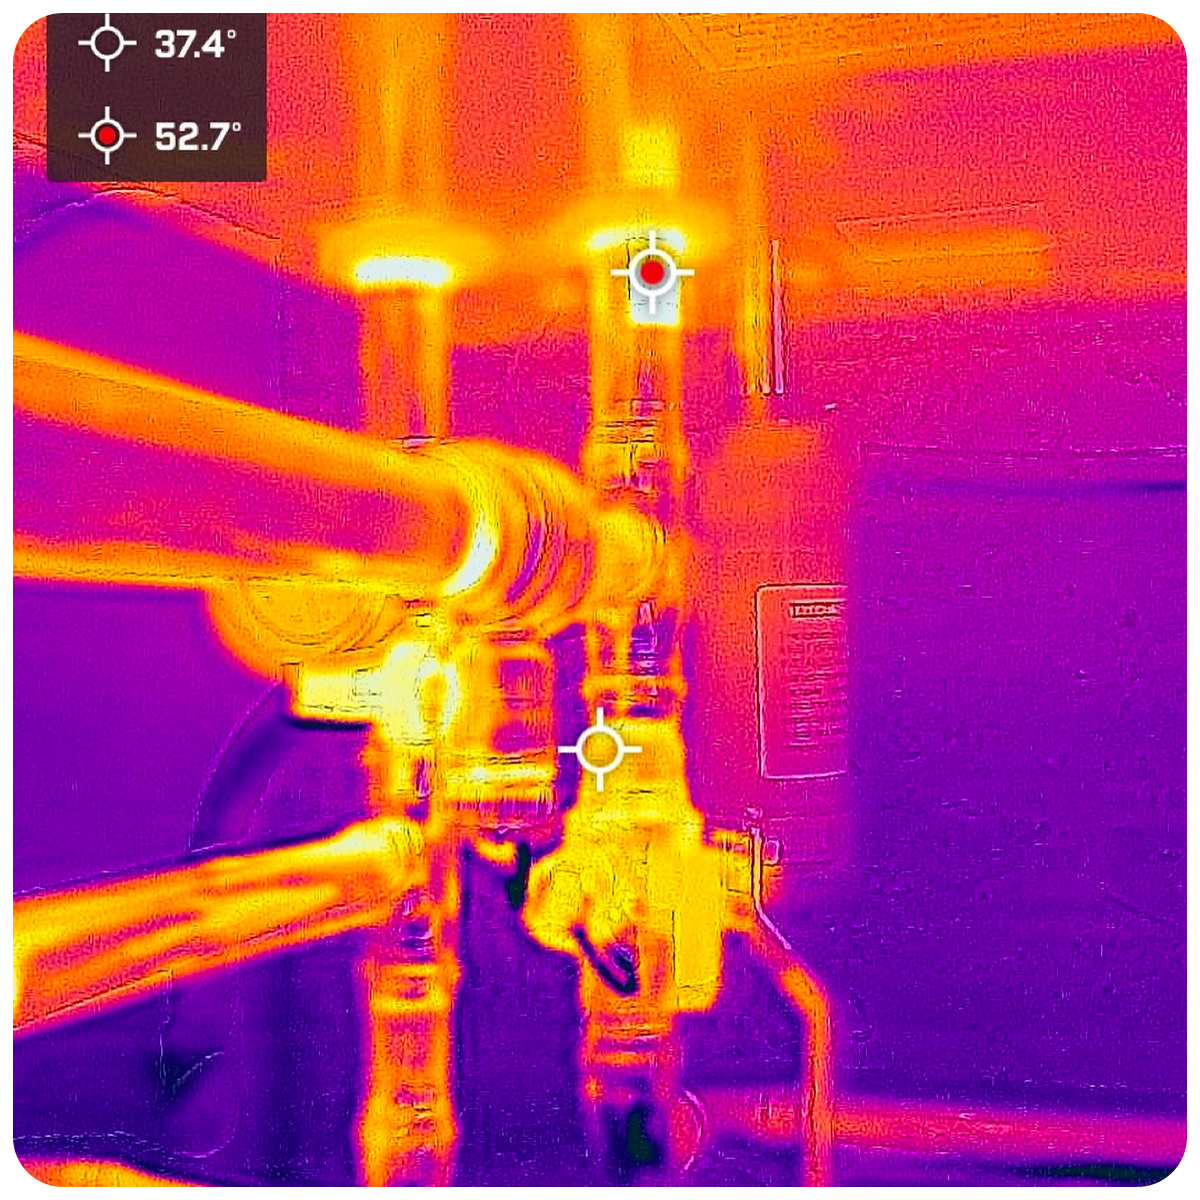 Infared image of plumbing in a house